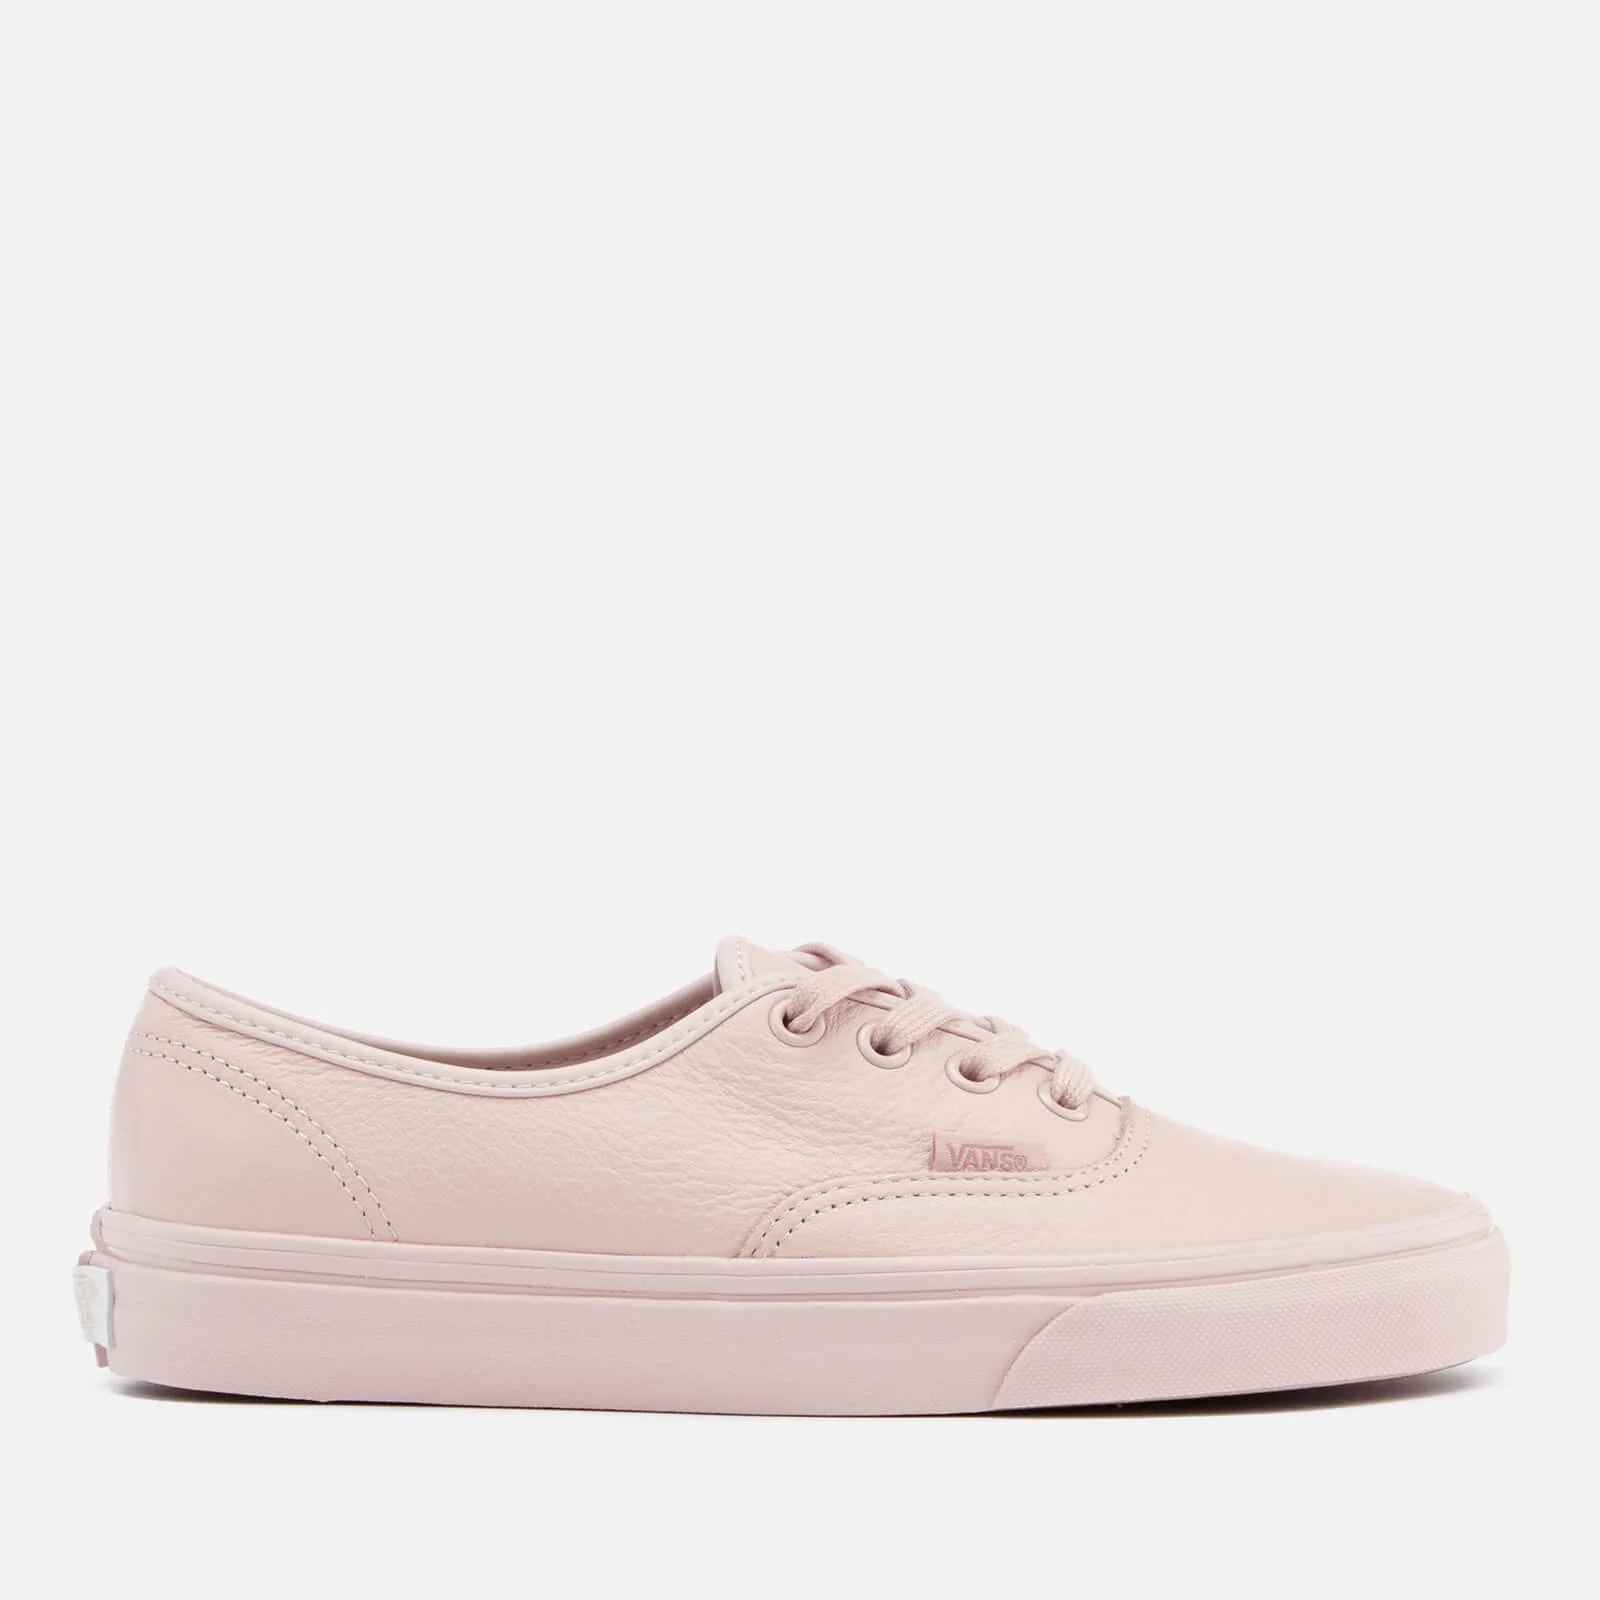 Vans Women's Authentic Leather Trainers - Mono/Sepia Rose Image 1